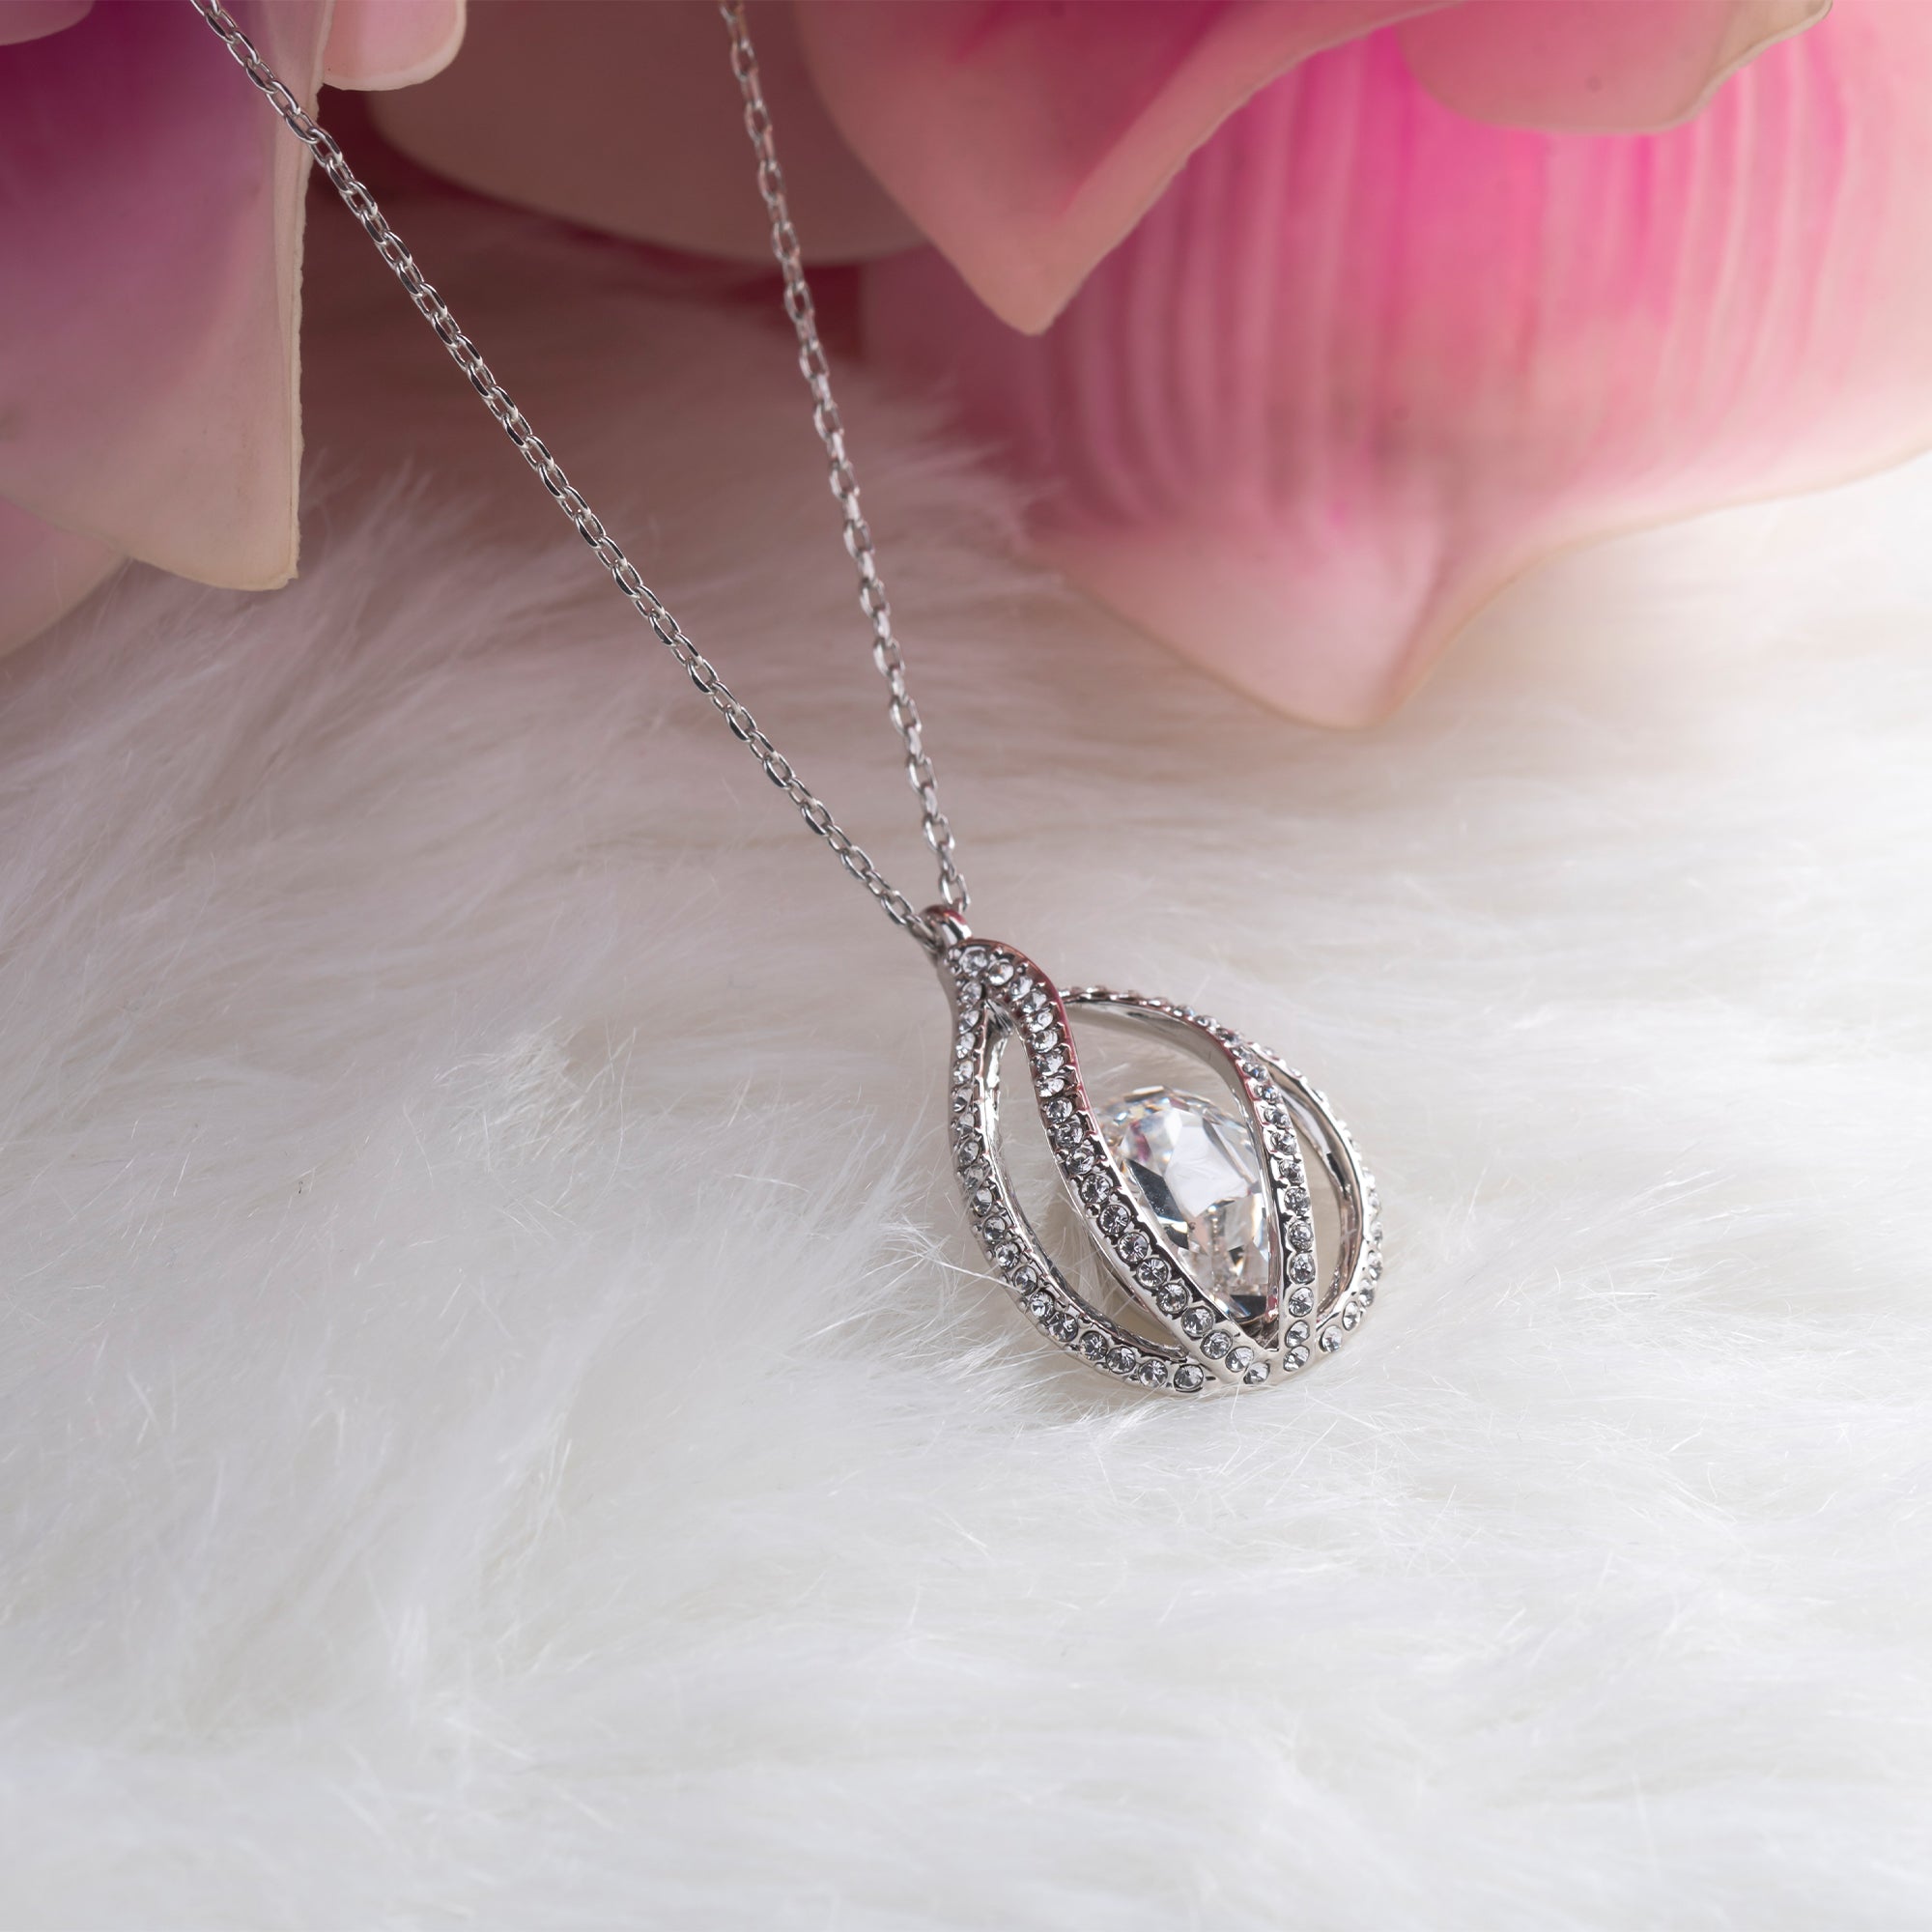 TRYNDI™ To An Amazing New Mom Birdcage Necklace With Authentic Swarovski Crystals